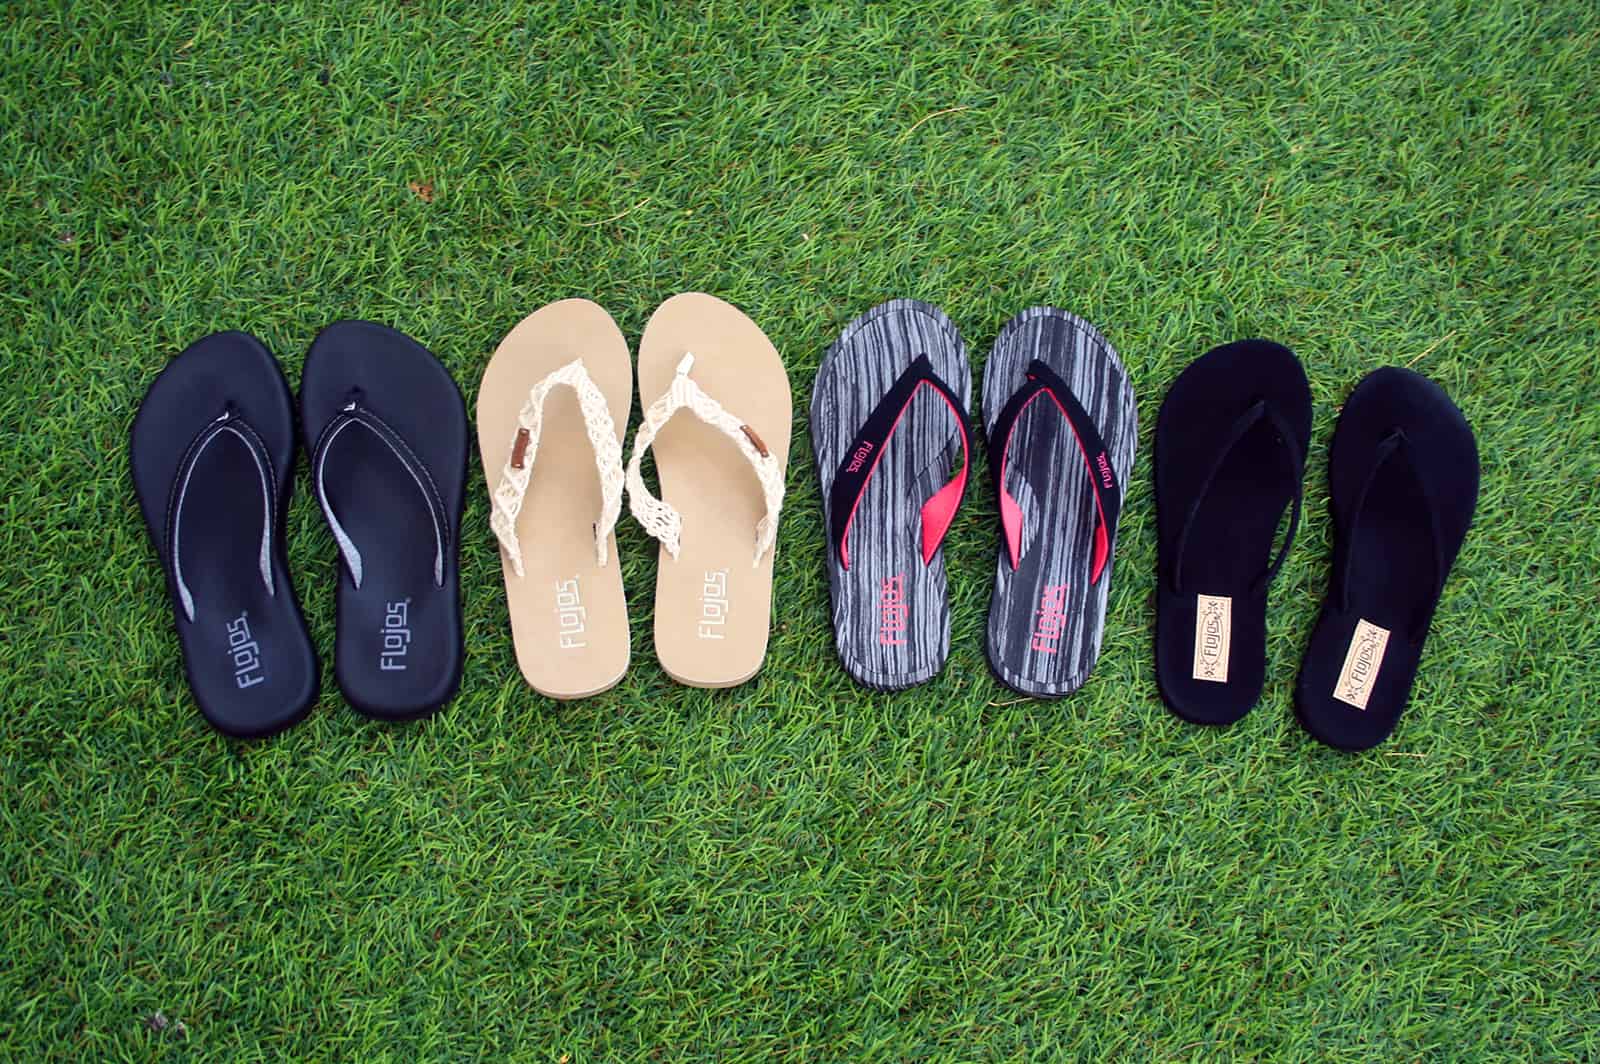 Choosing the Most Foot-Friendly Comfortable Sandals